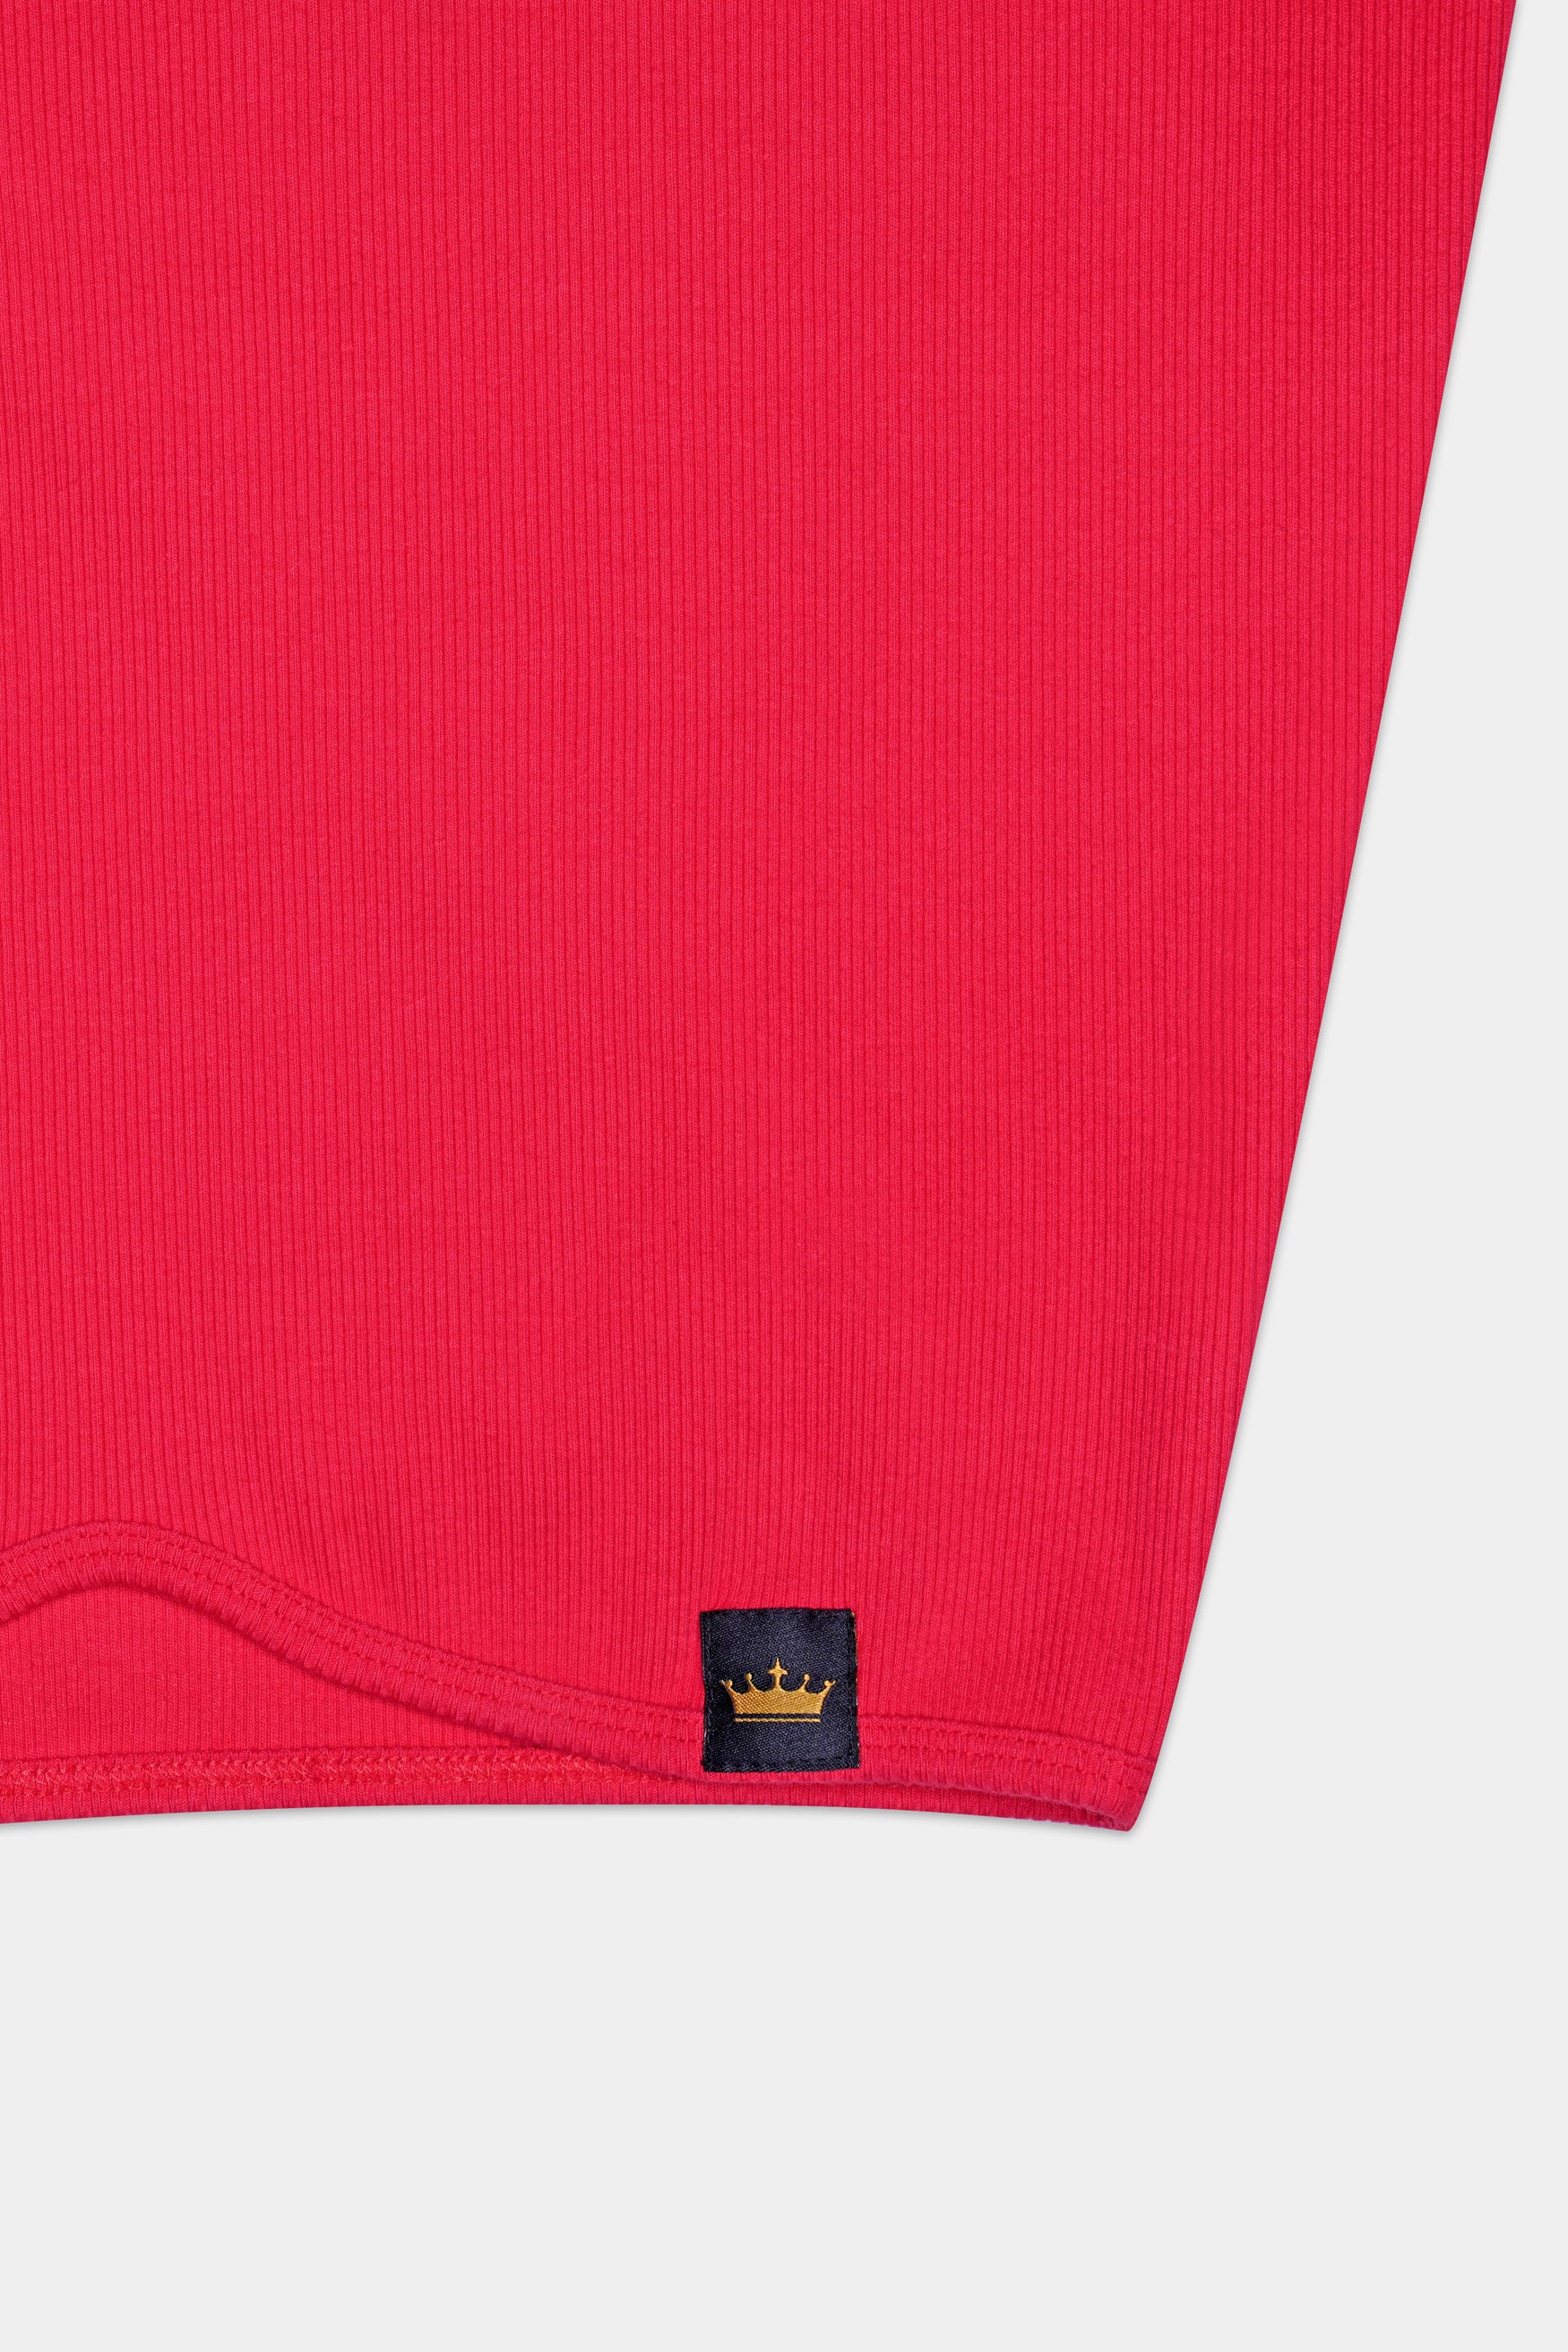 Radical Red Premium Cotton Knit Stretchable Crop Top